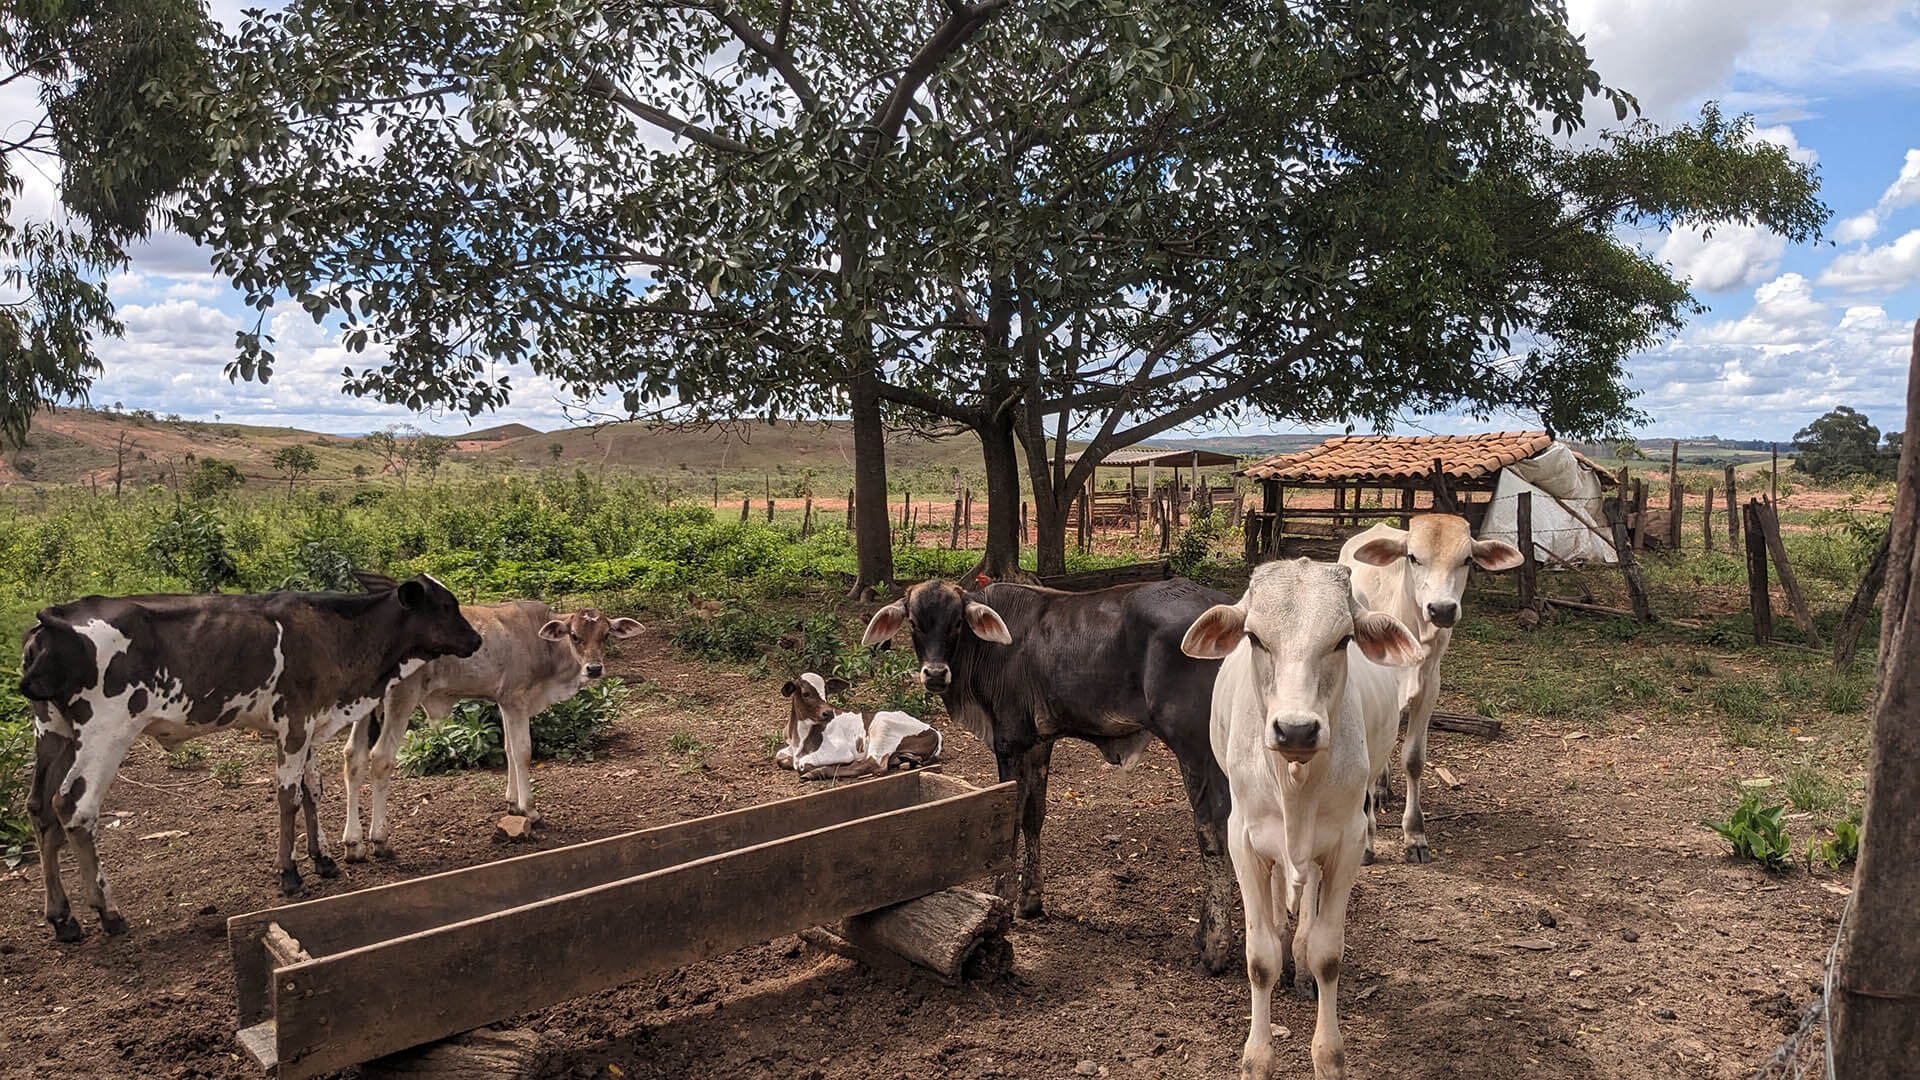 Cows feed at a trough on one of more than 100 farms participating in the Brazil Pastureland Regeneration with Native Palm Silvopasture Project